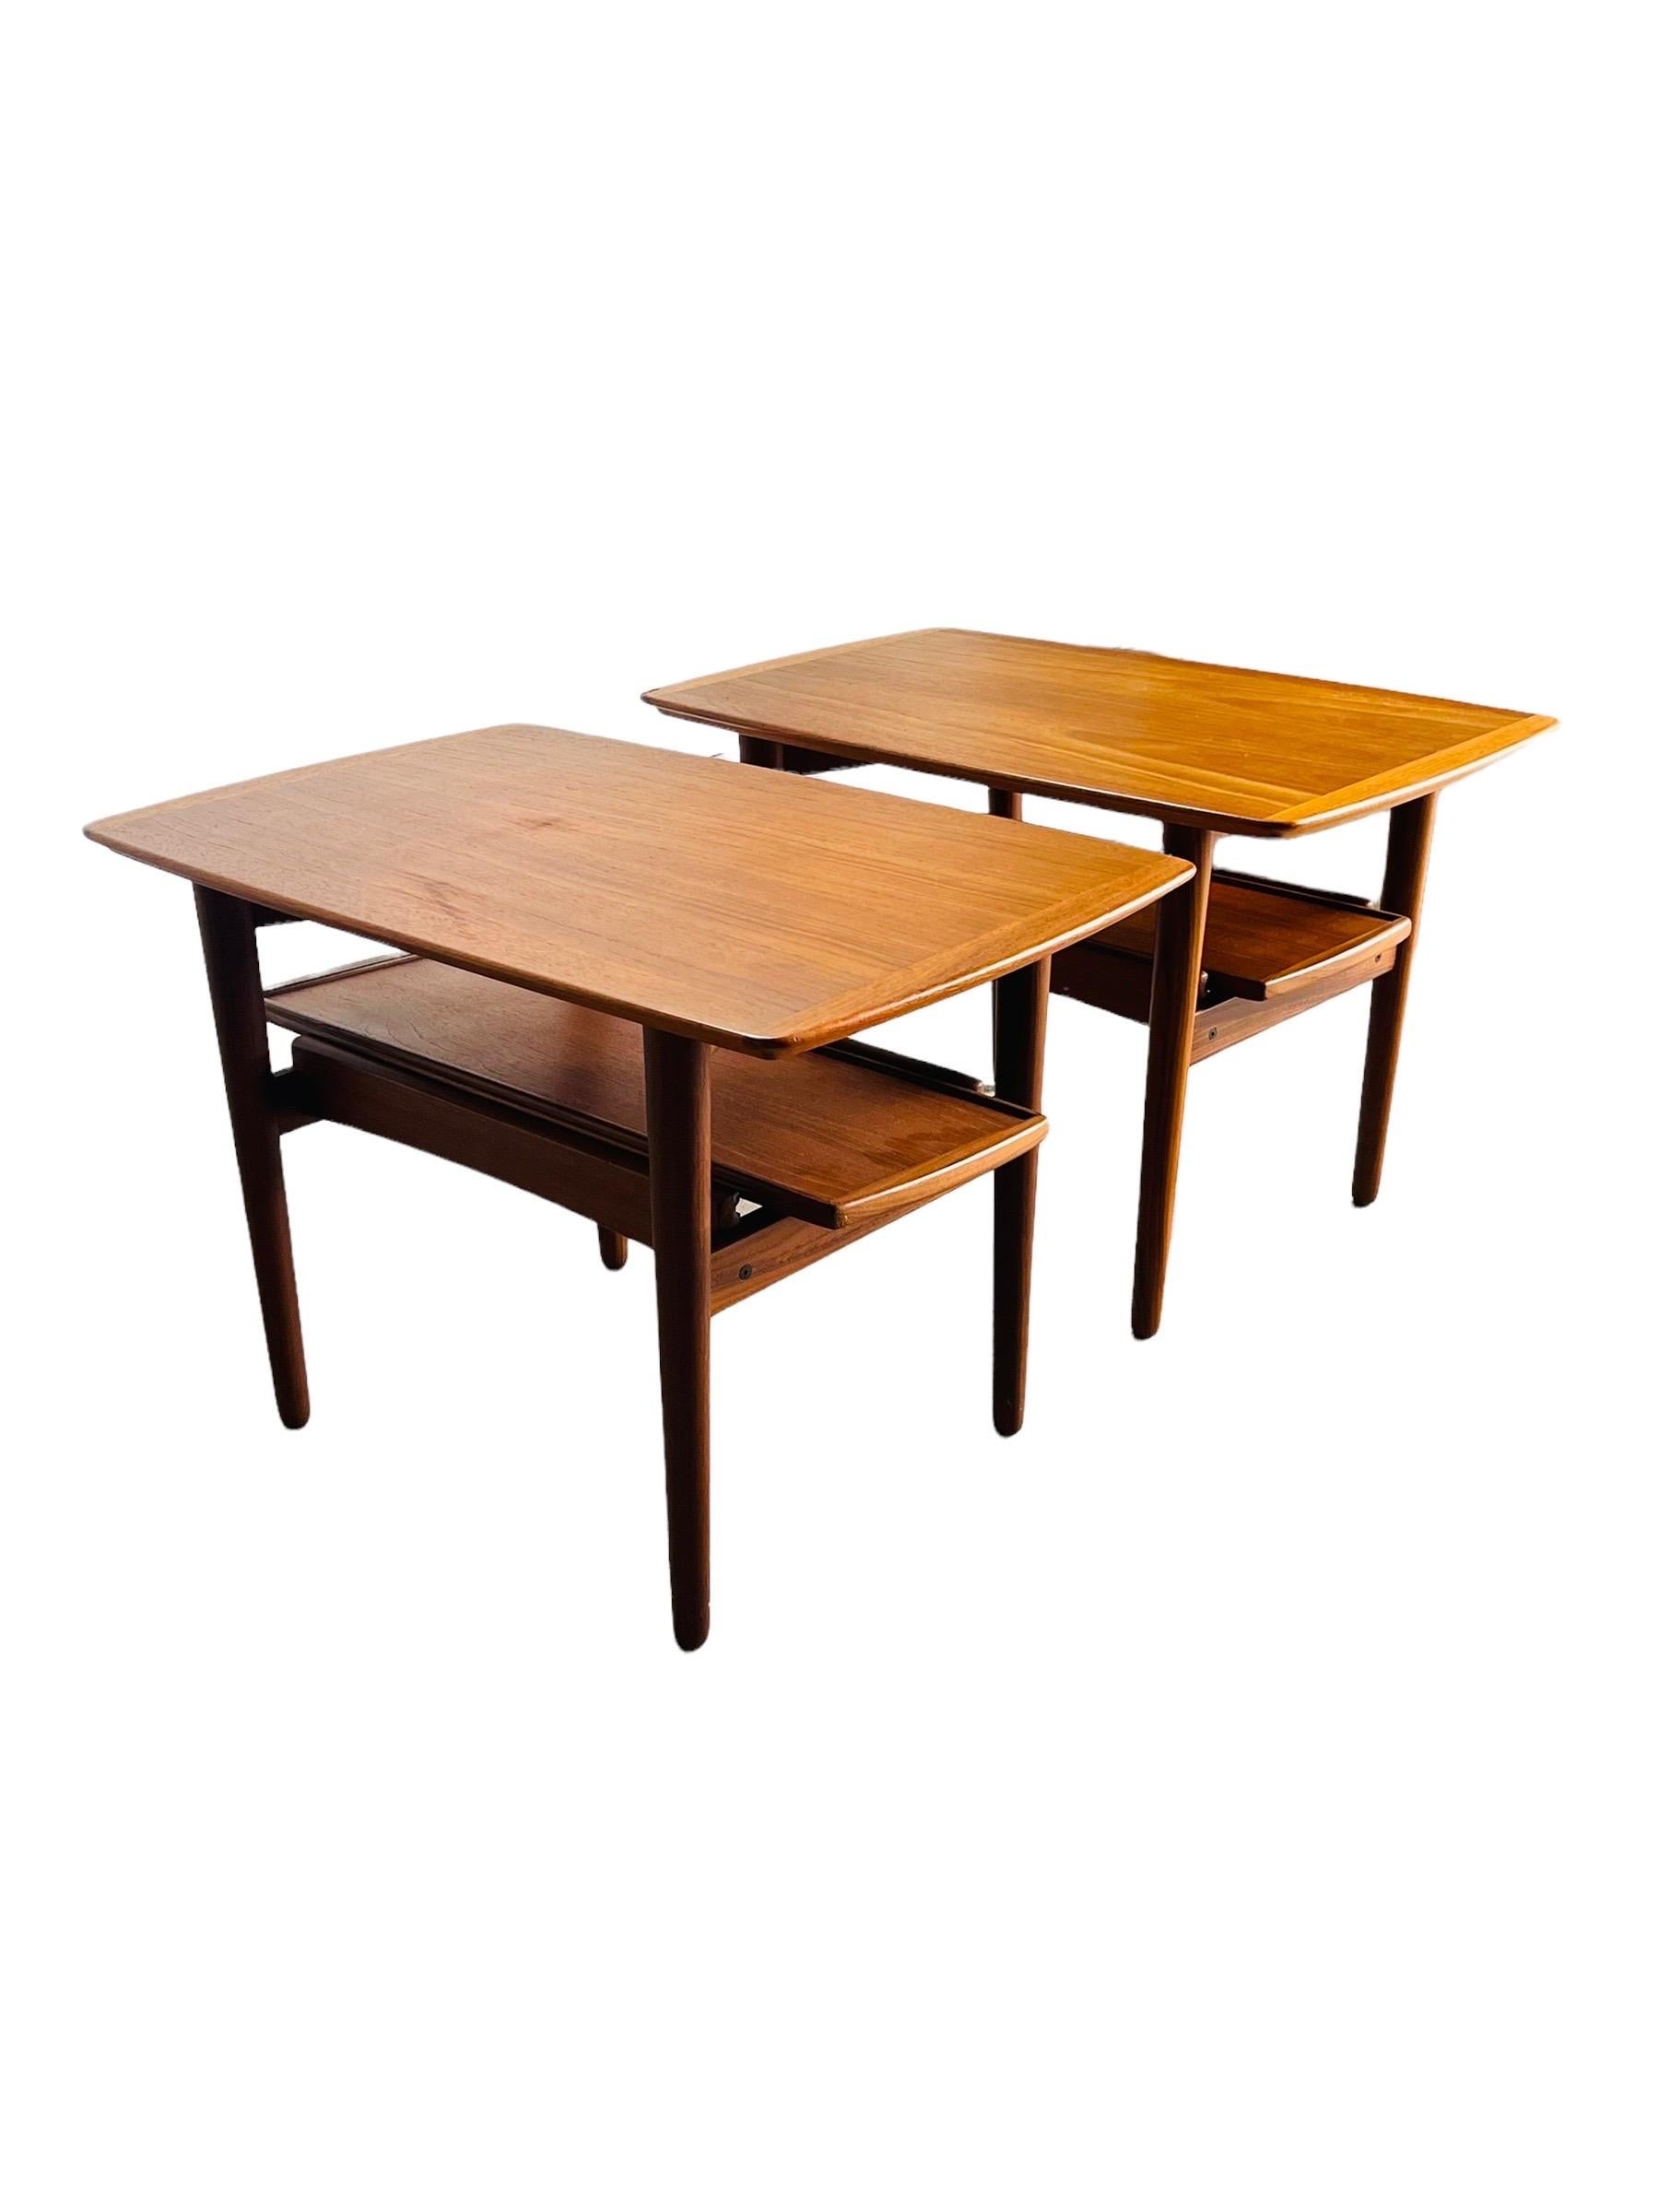 These stunning Danish Modern Teak End Tables by Bramin Mobler will add mid-century modern charm and character to any home. The solid teak wood is both durable and stylish, offering a timeless look that can easily be incorporated into any decor. The